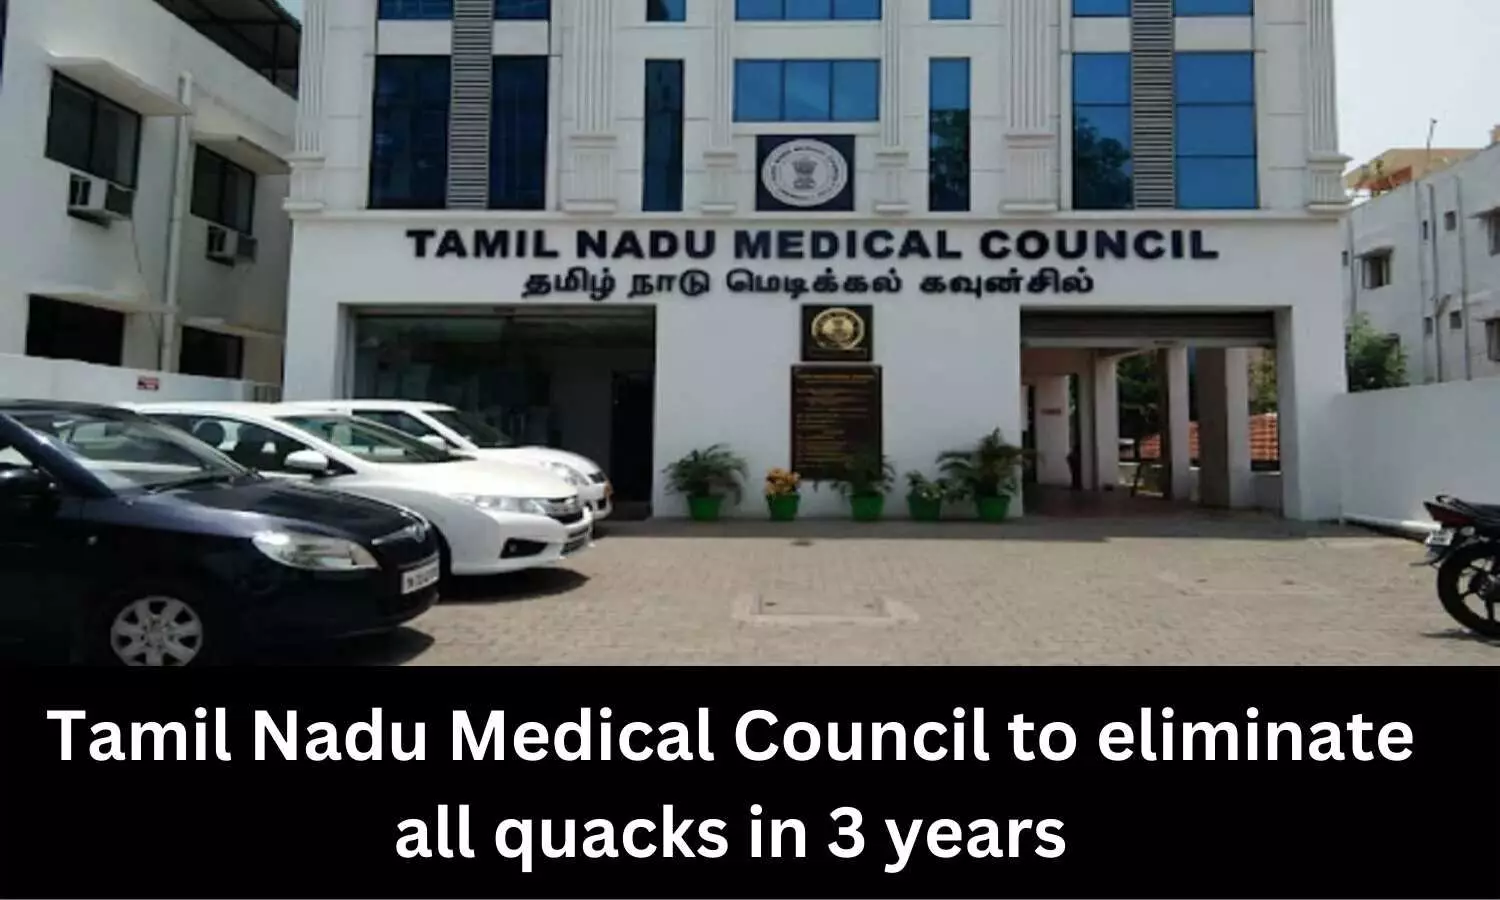 Tamil Nadu Medical Council to eliminate all quacks in 3 years